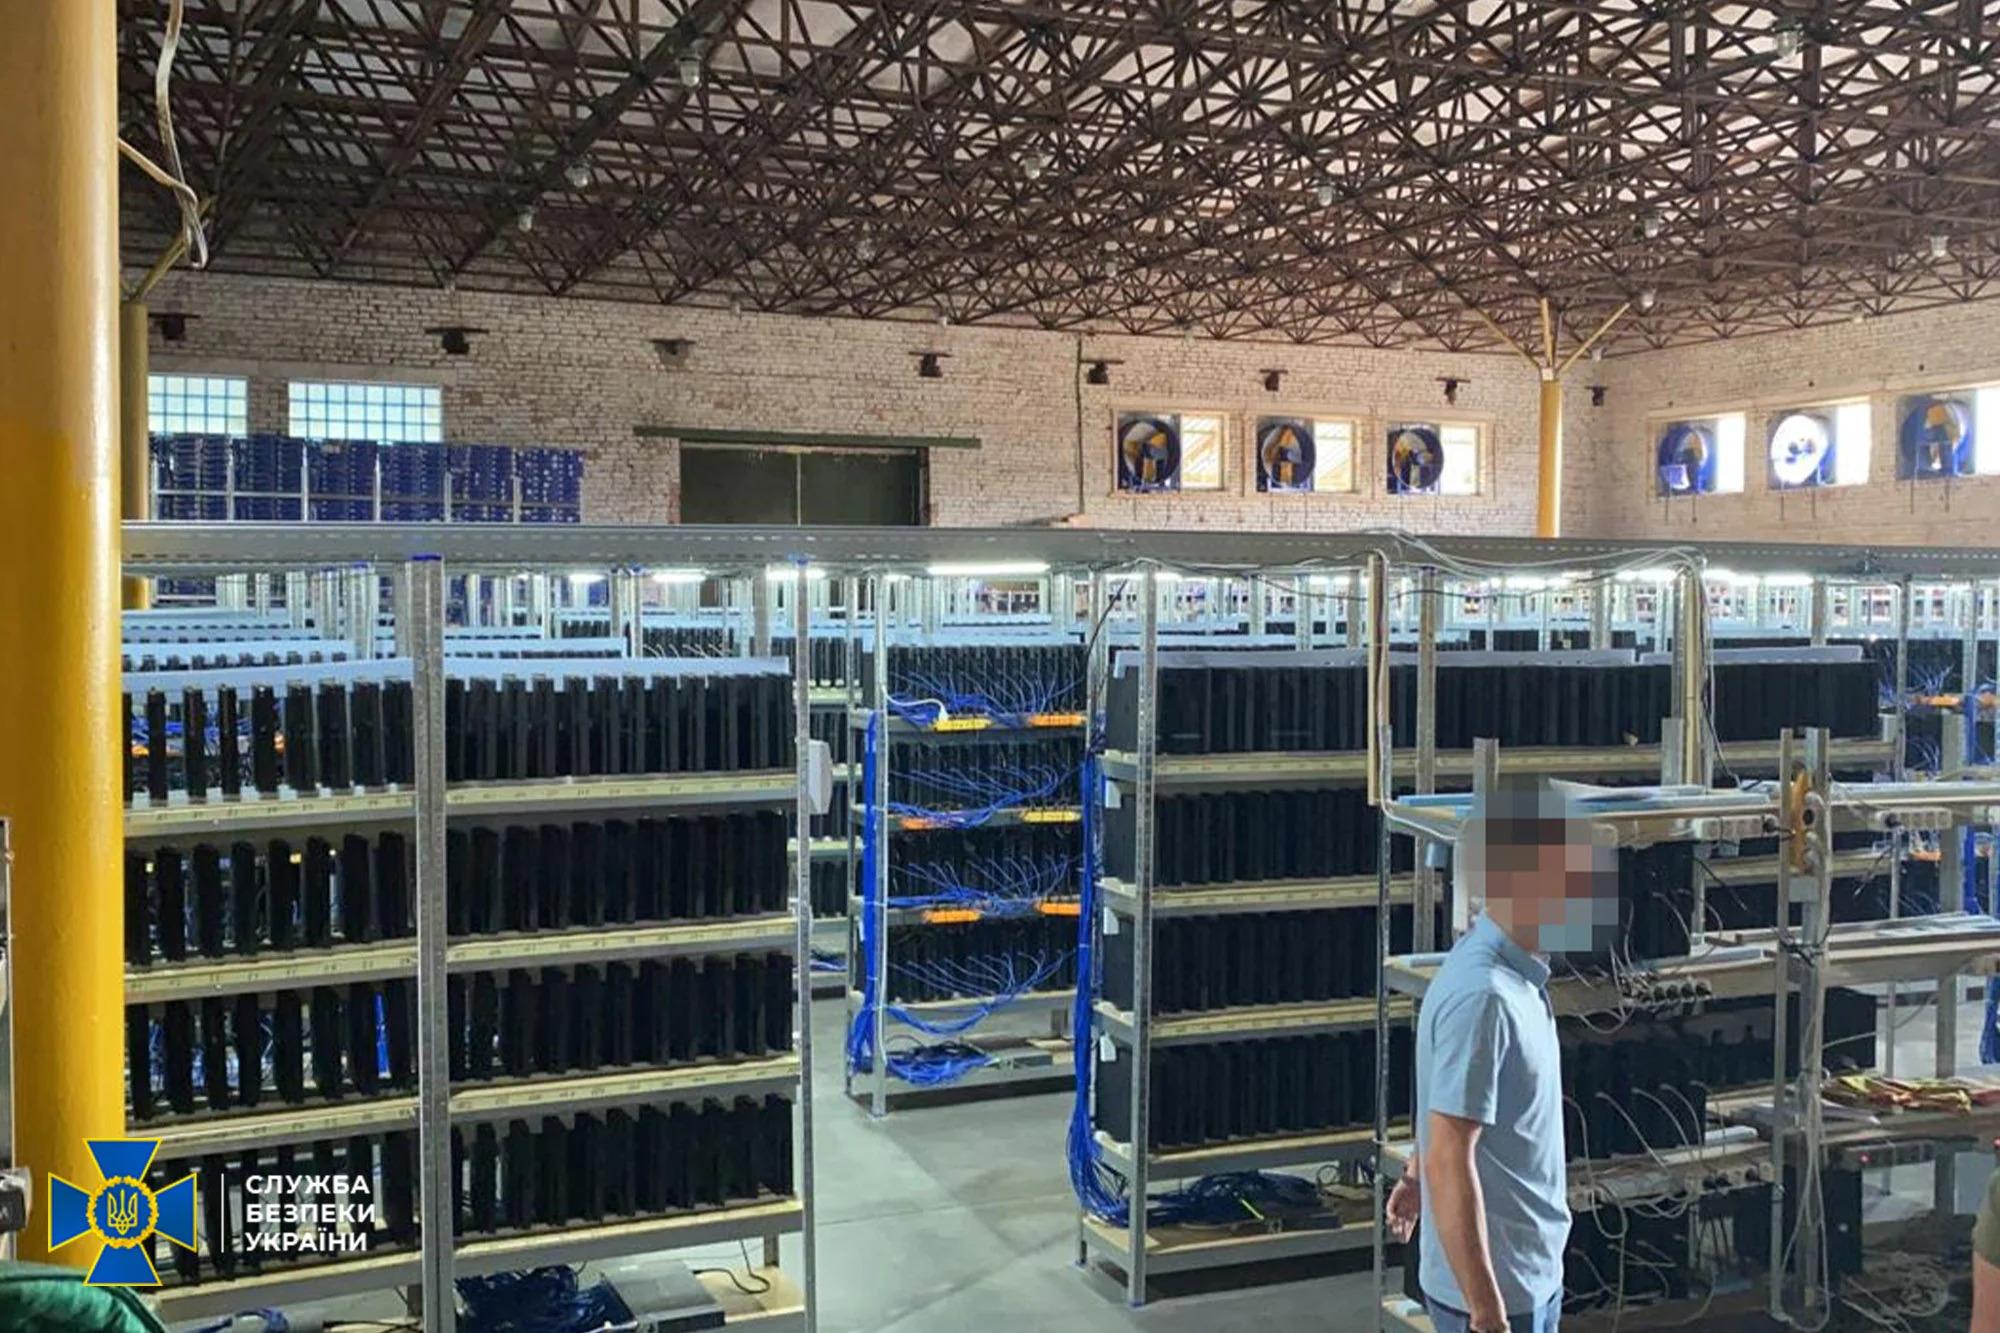 SBU closes crypto mining farm with 3,800 PS4 for electricity theft in  Ukraine | News Rumours